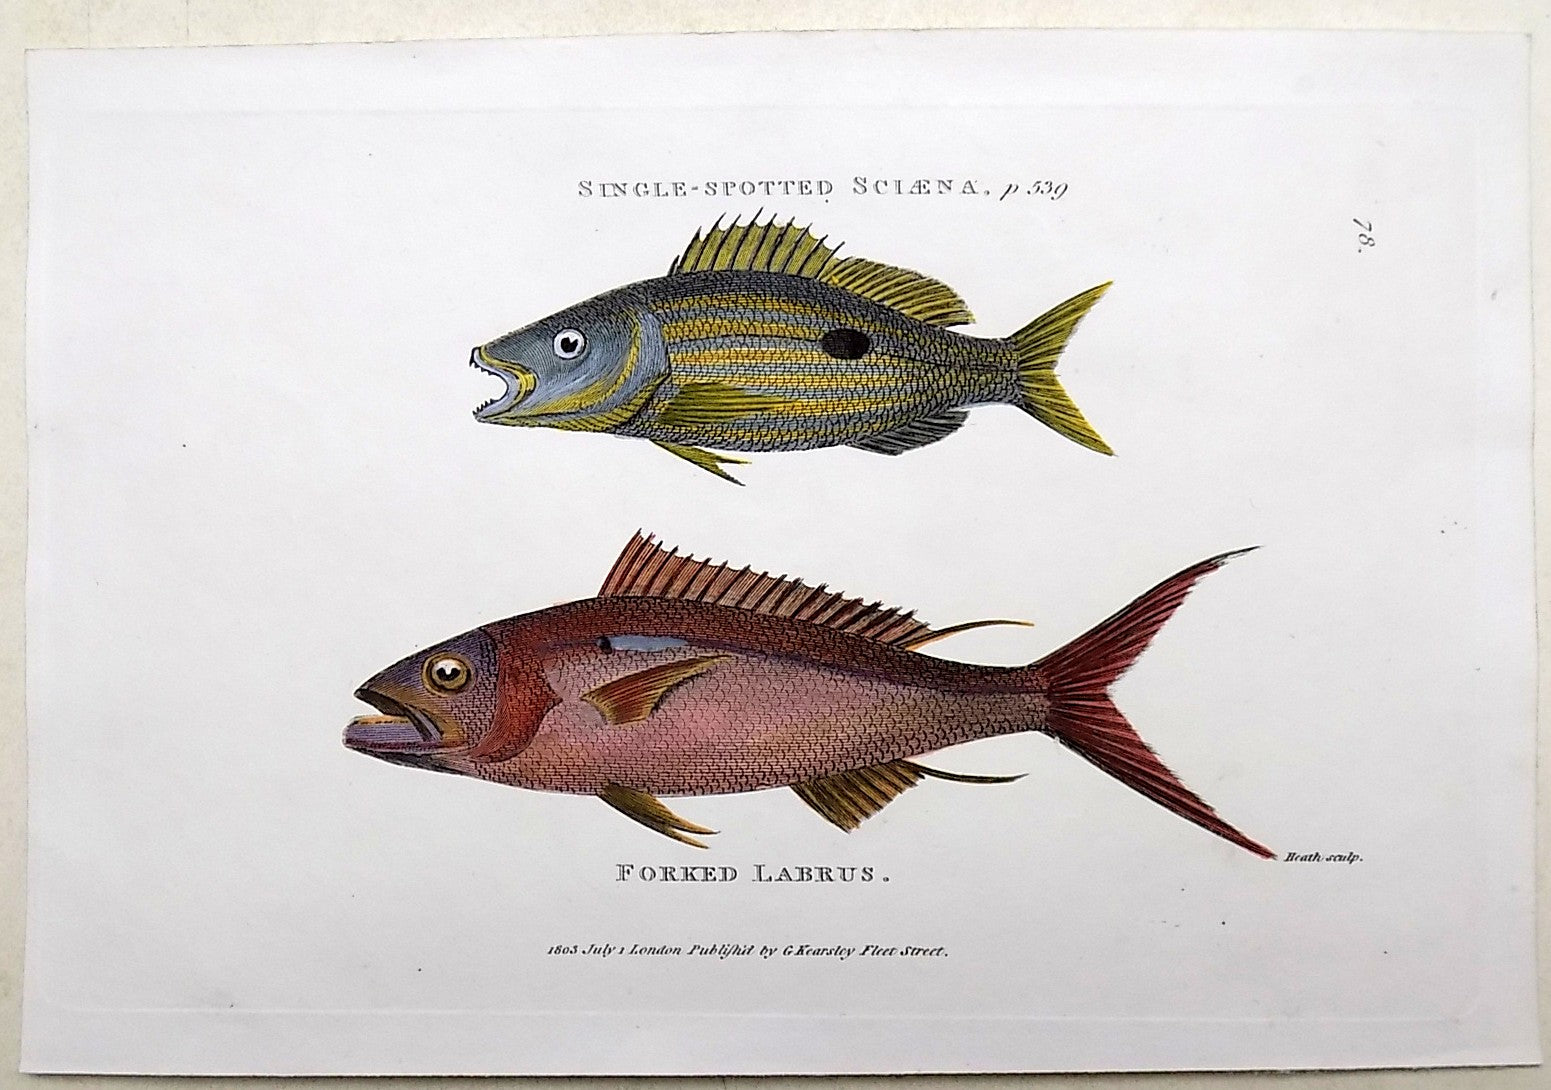 1804 Shaw - LABRUS SCIAENA FISH - LARGE PAPER edition in hand colour